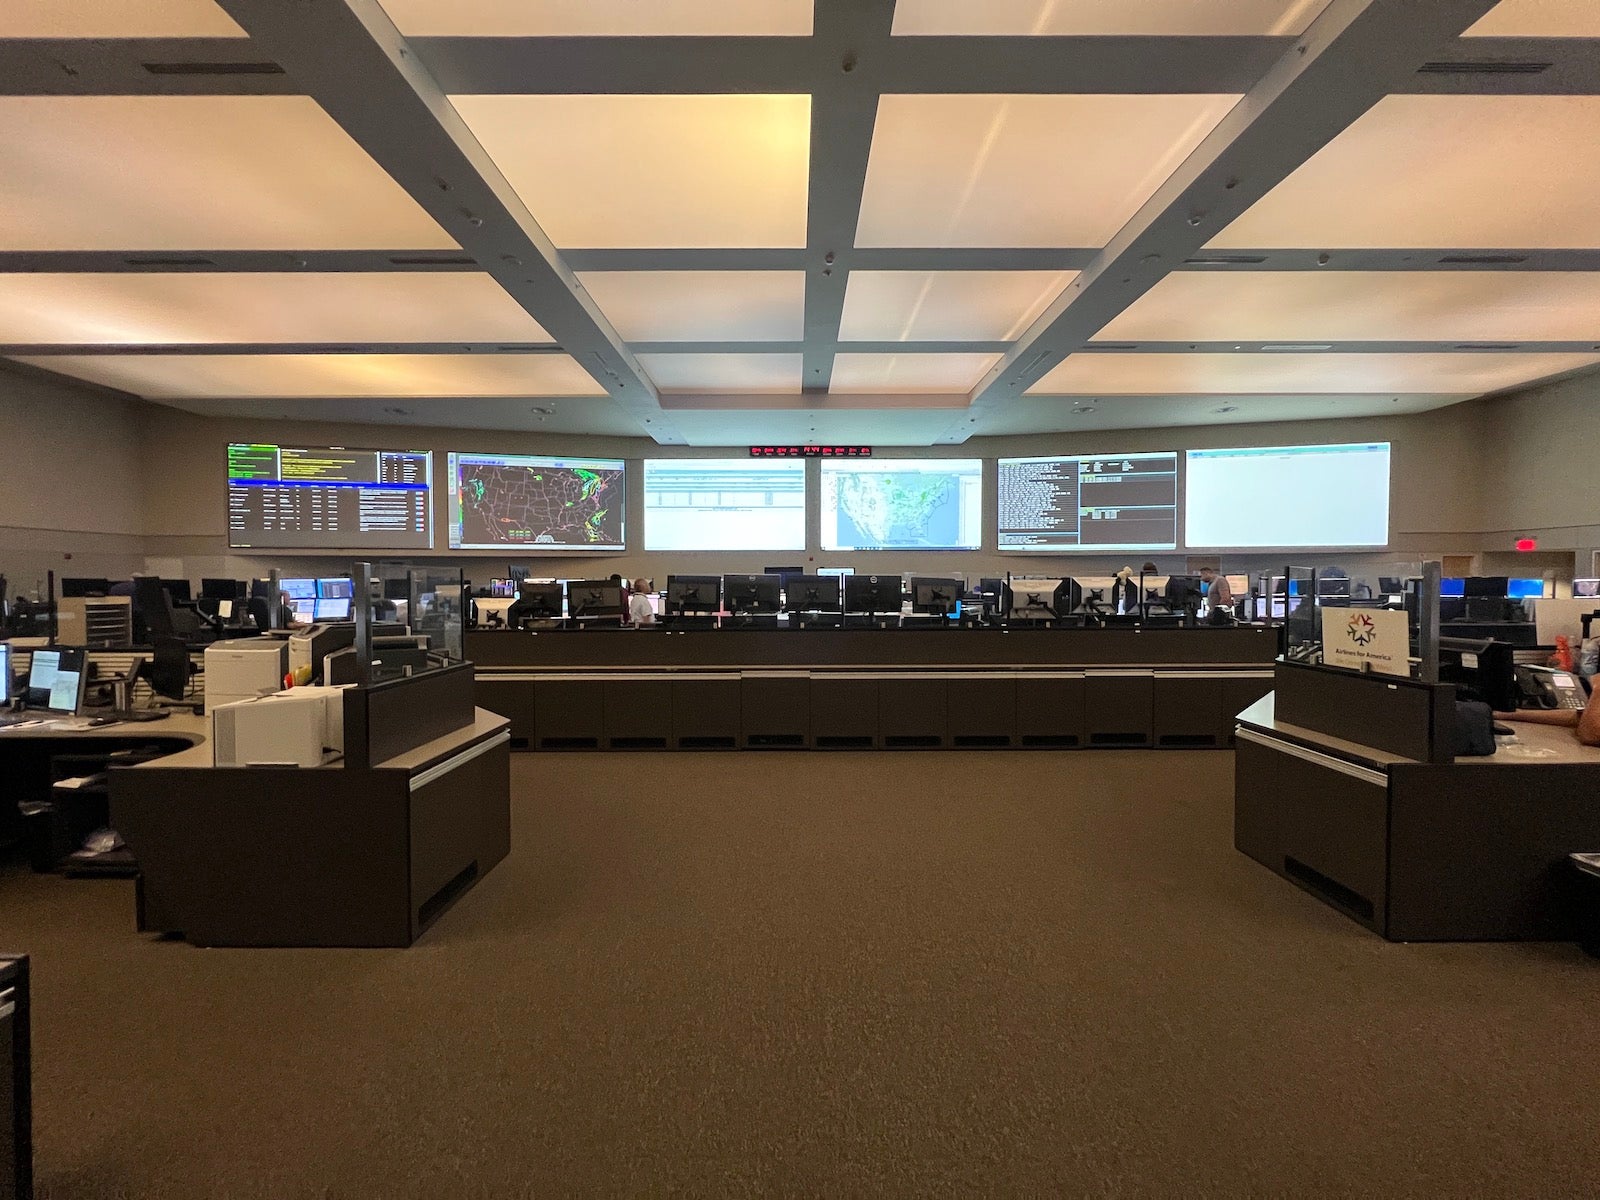 air traffic control system command center